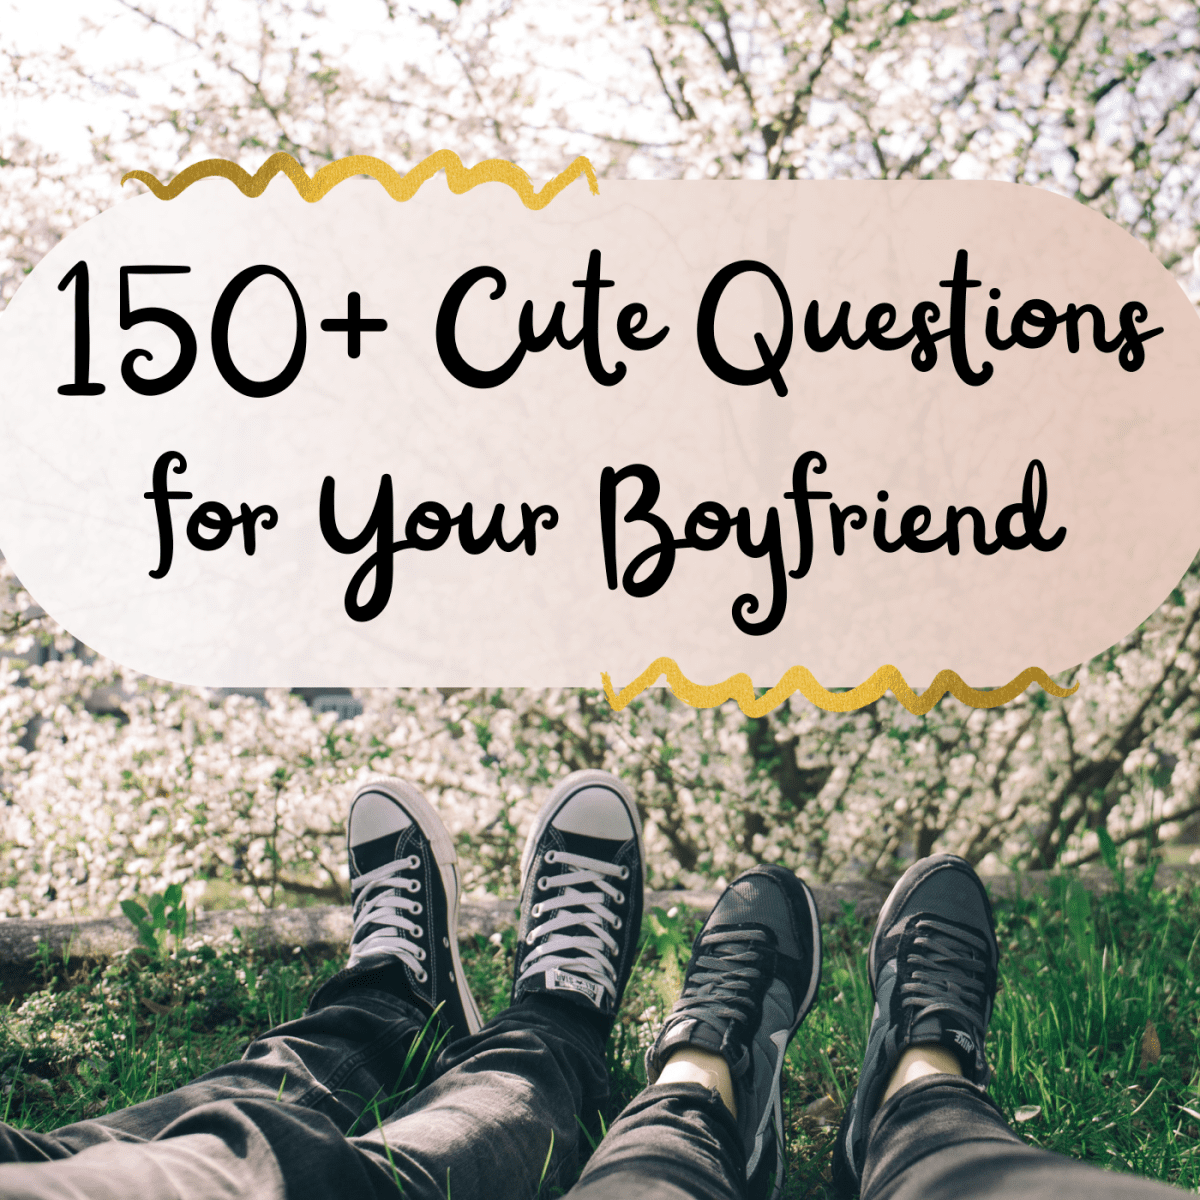 Questions you can ask your boyfriend for fun